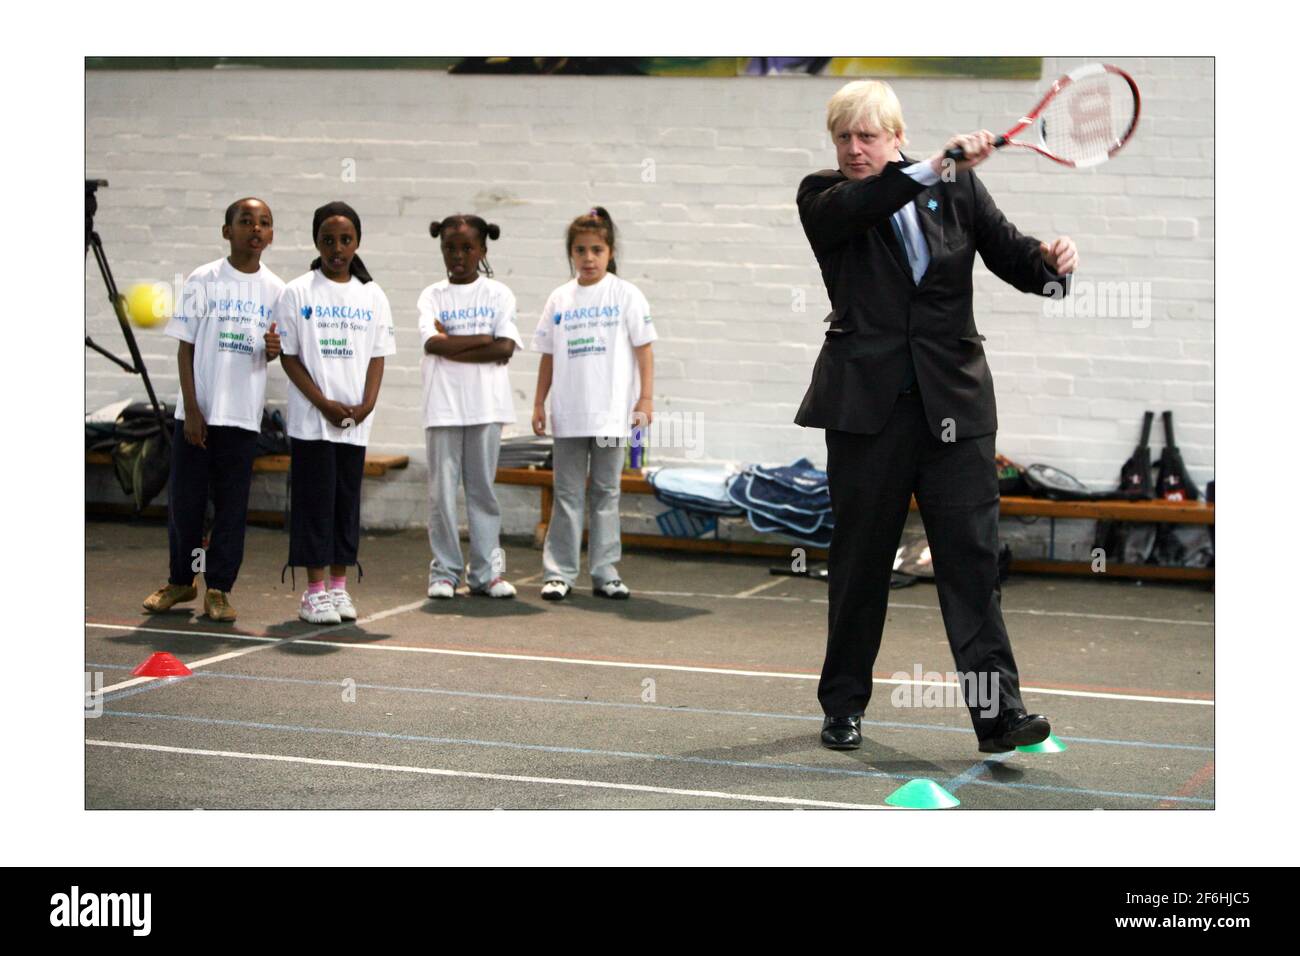 London Mayor Boris Johnson arrives with MP for Vauxhall Kate Hoey during a  visit to open new local community tennis courts at the old site of the old  Lillian Baylis school in